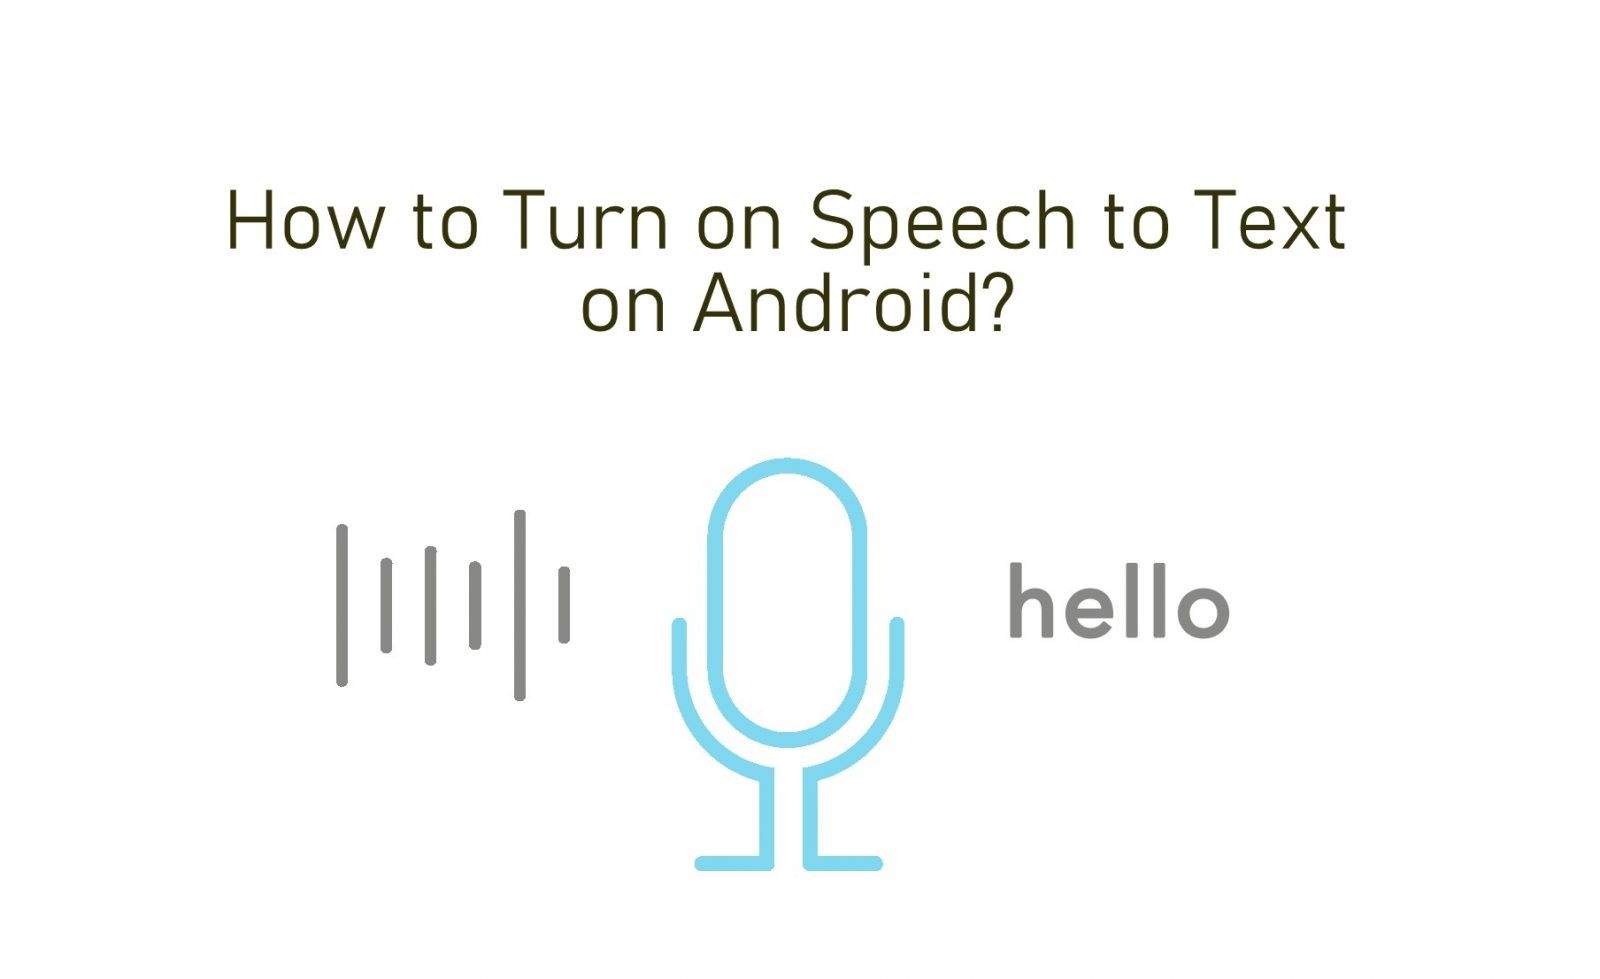 Software design document for speech to text android app